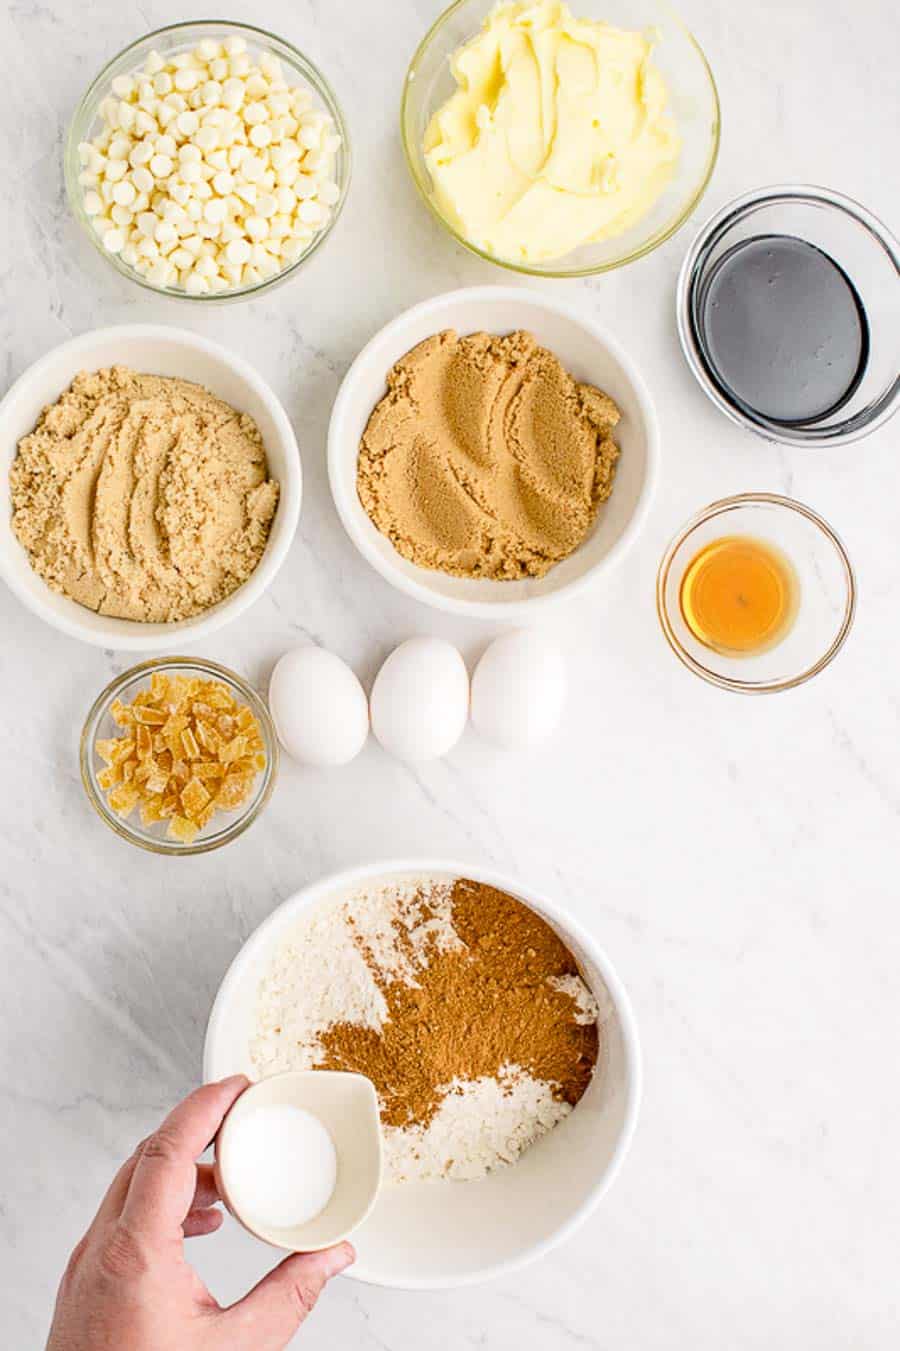 Portion bowls each with raw ingredients to make gingerbread blondies.